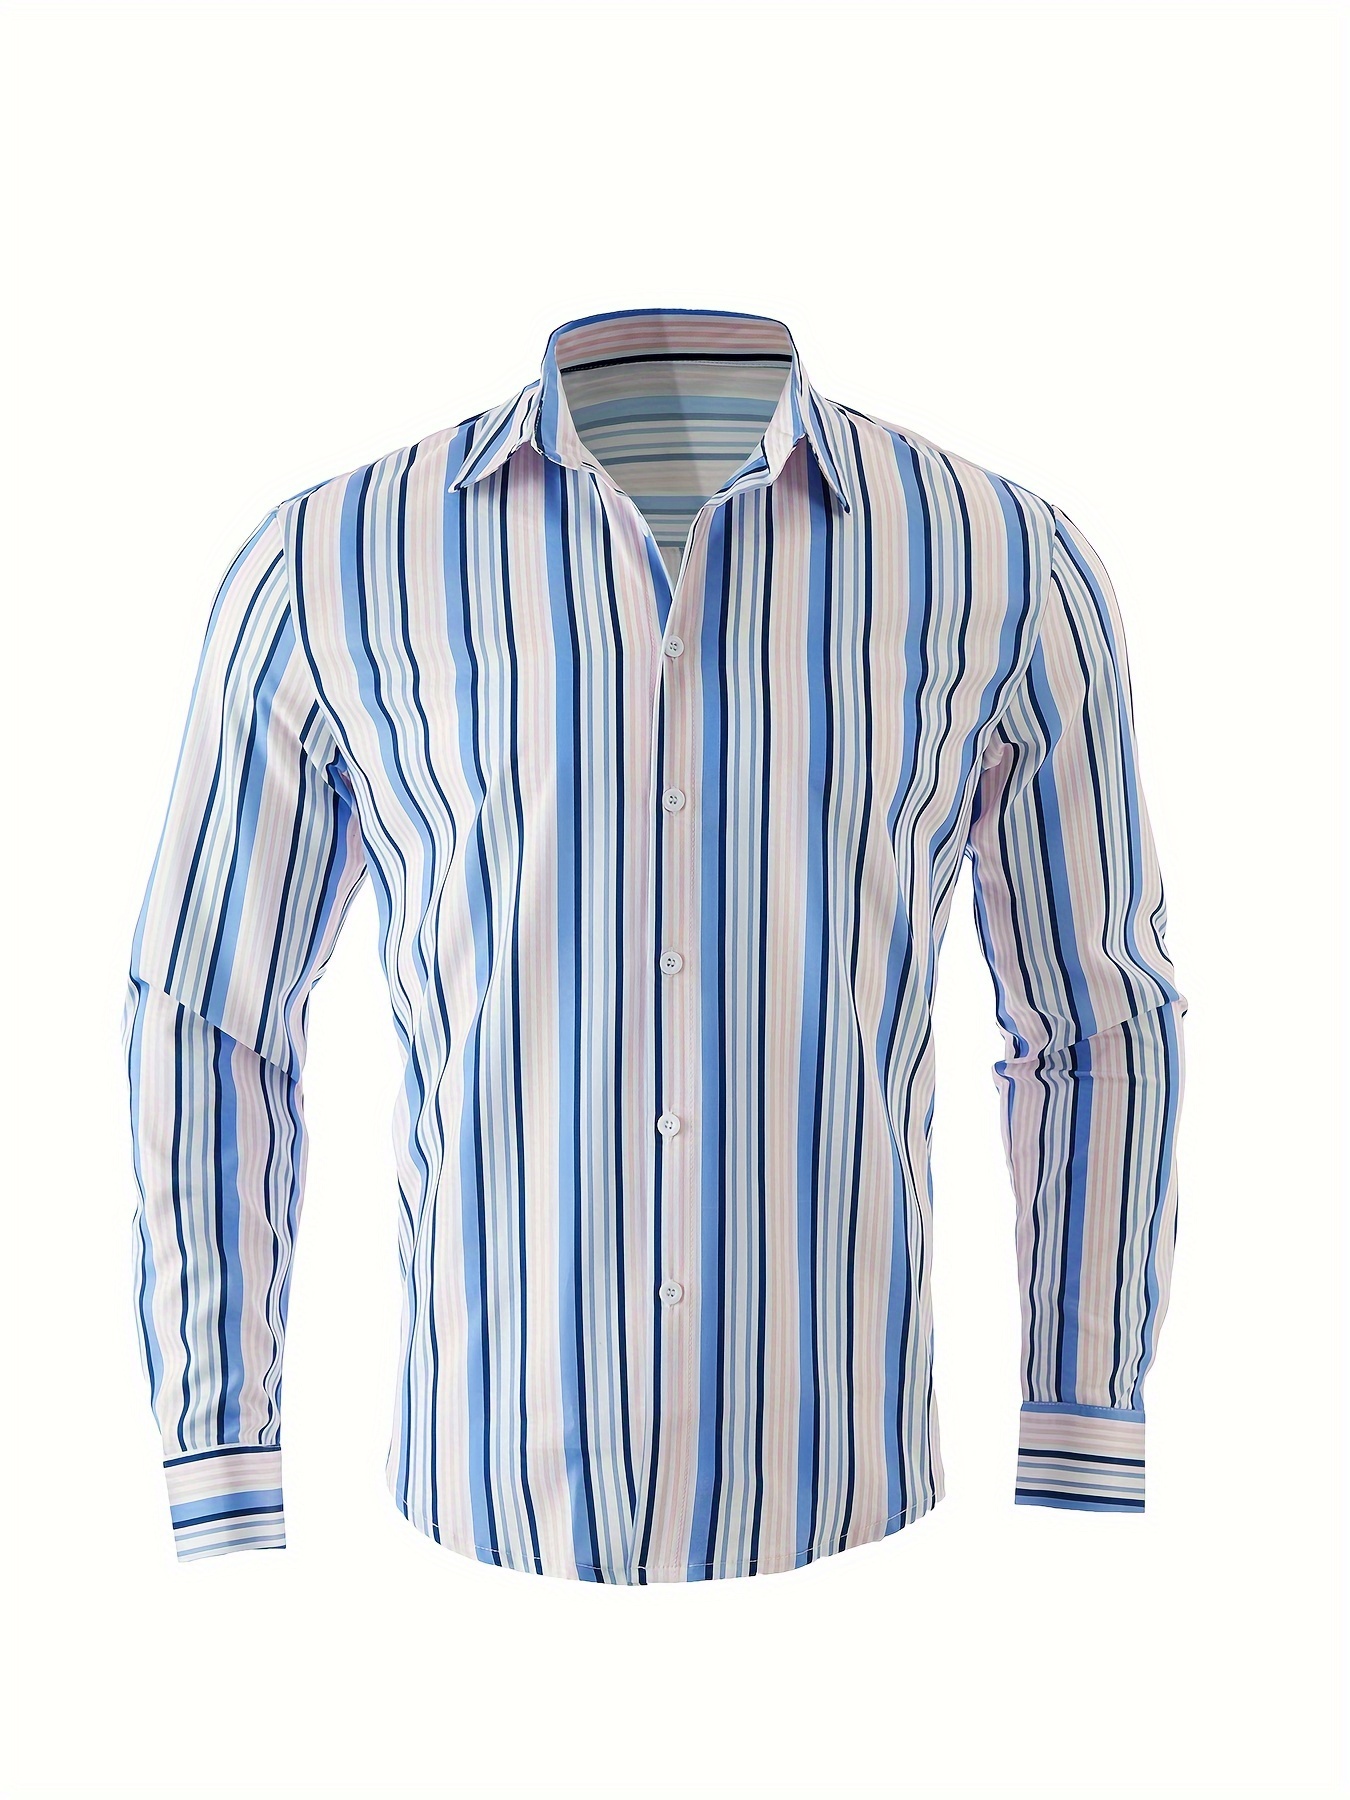 mens classic design striped long sleeve button up shirt for business occasions spring fall mens clothing details 25